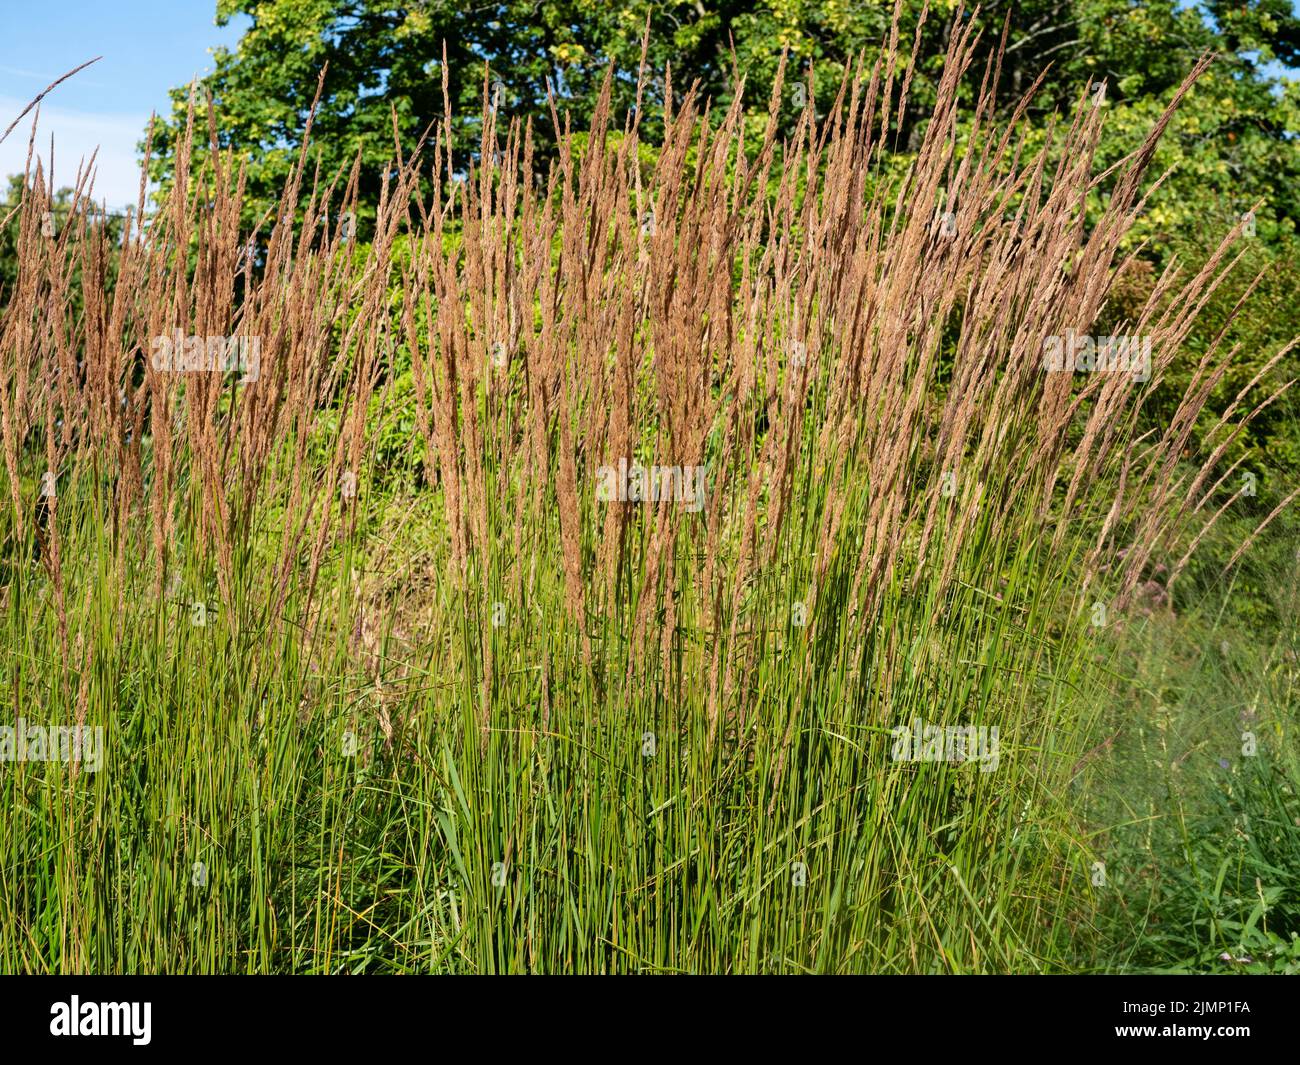 Brown, upright flowering panicles of the hardy reed feather grass, Calamagrostis x acutiflora 'Karl Foerster' Stock Photo